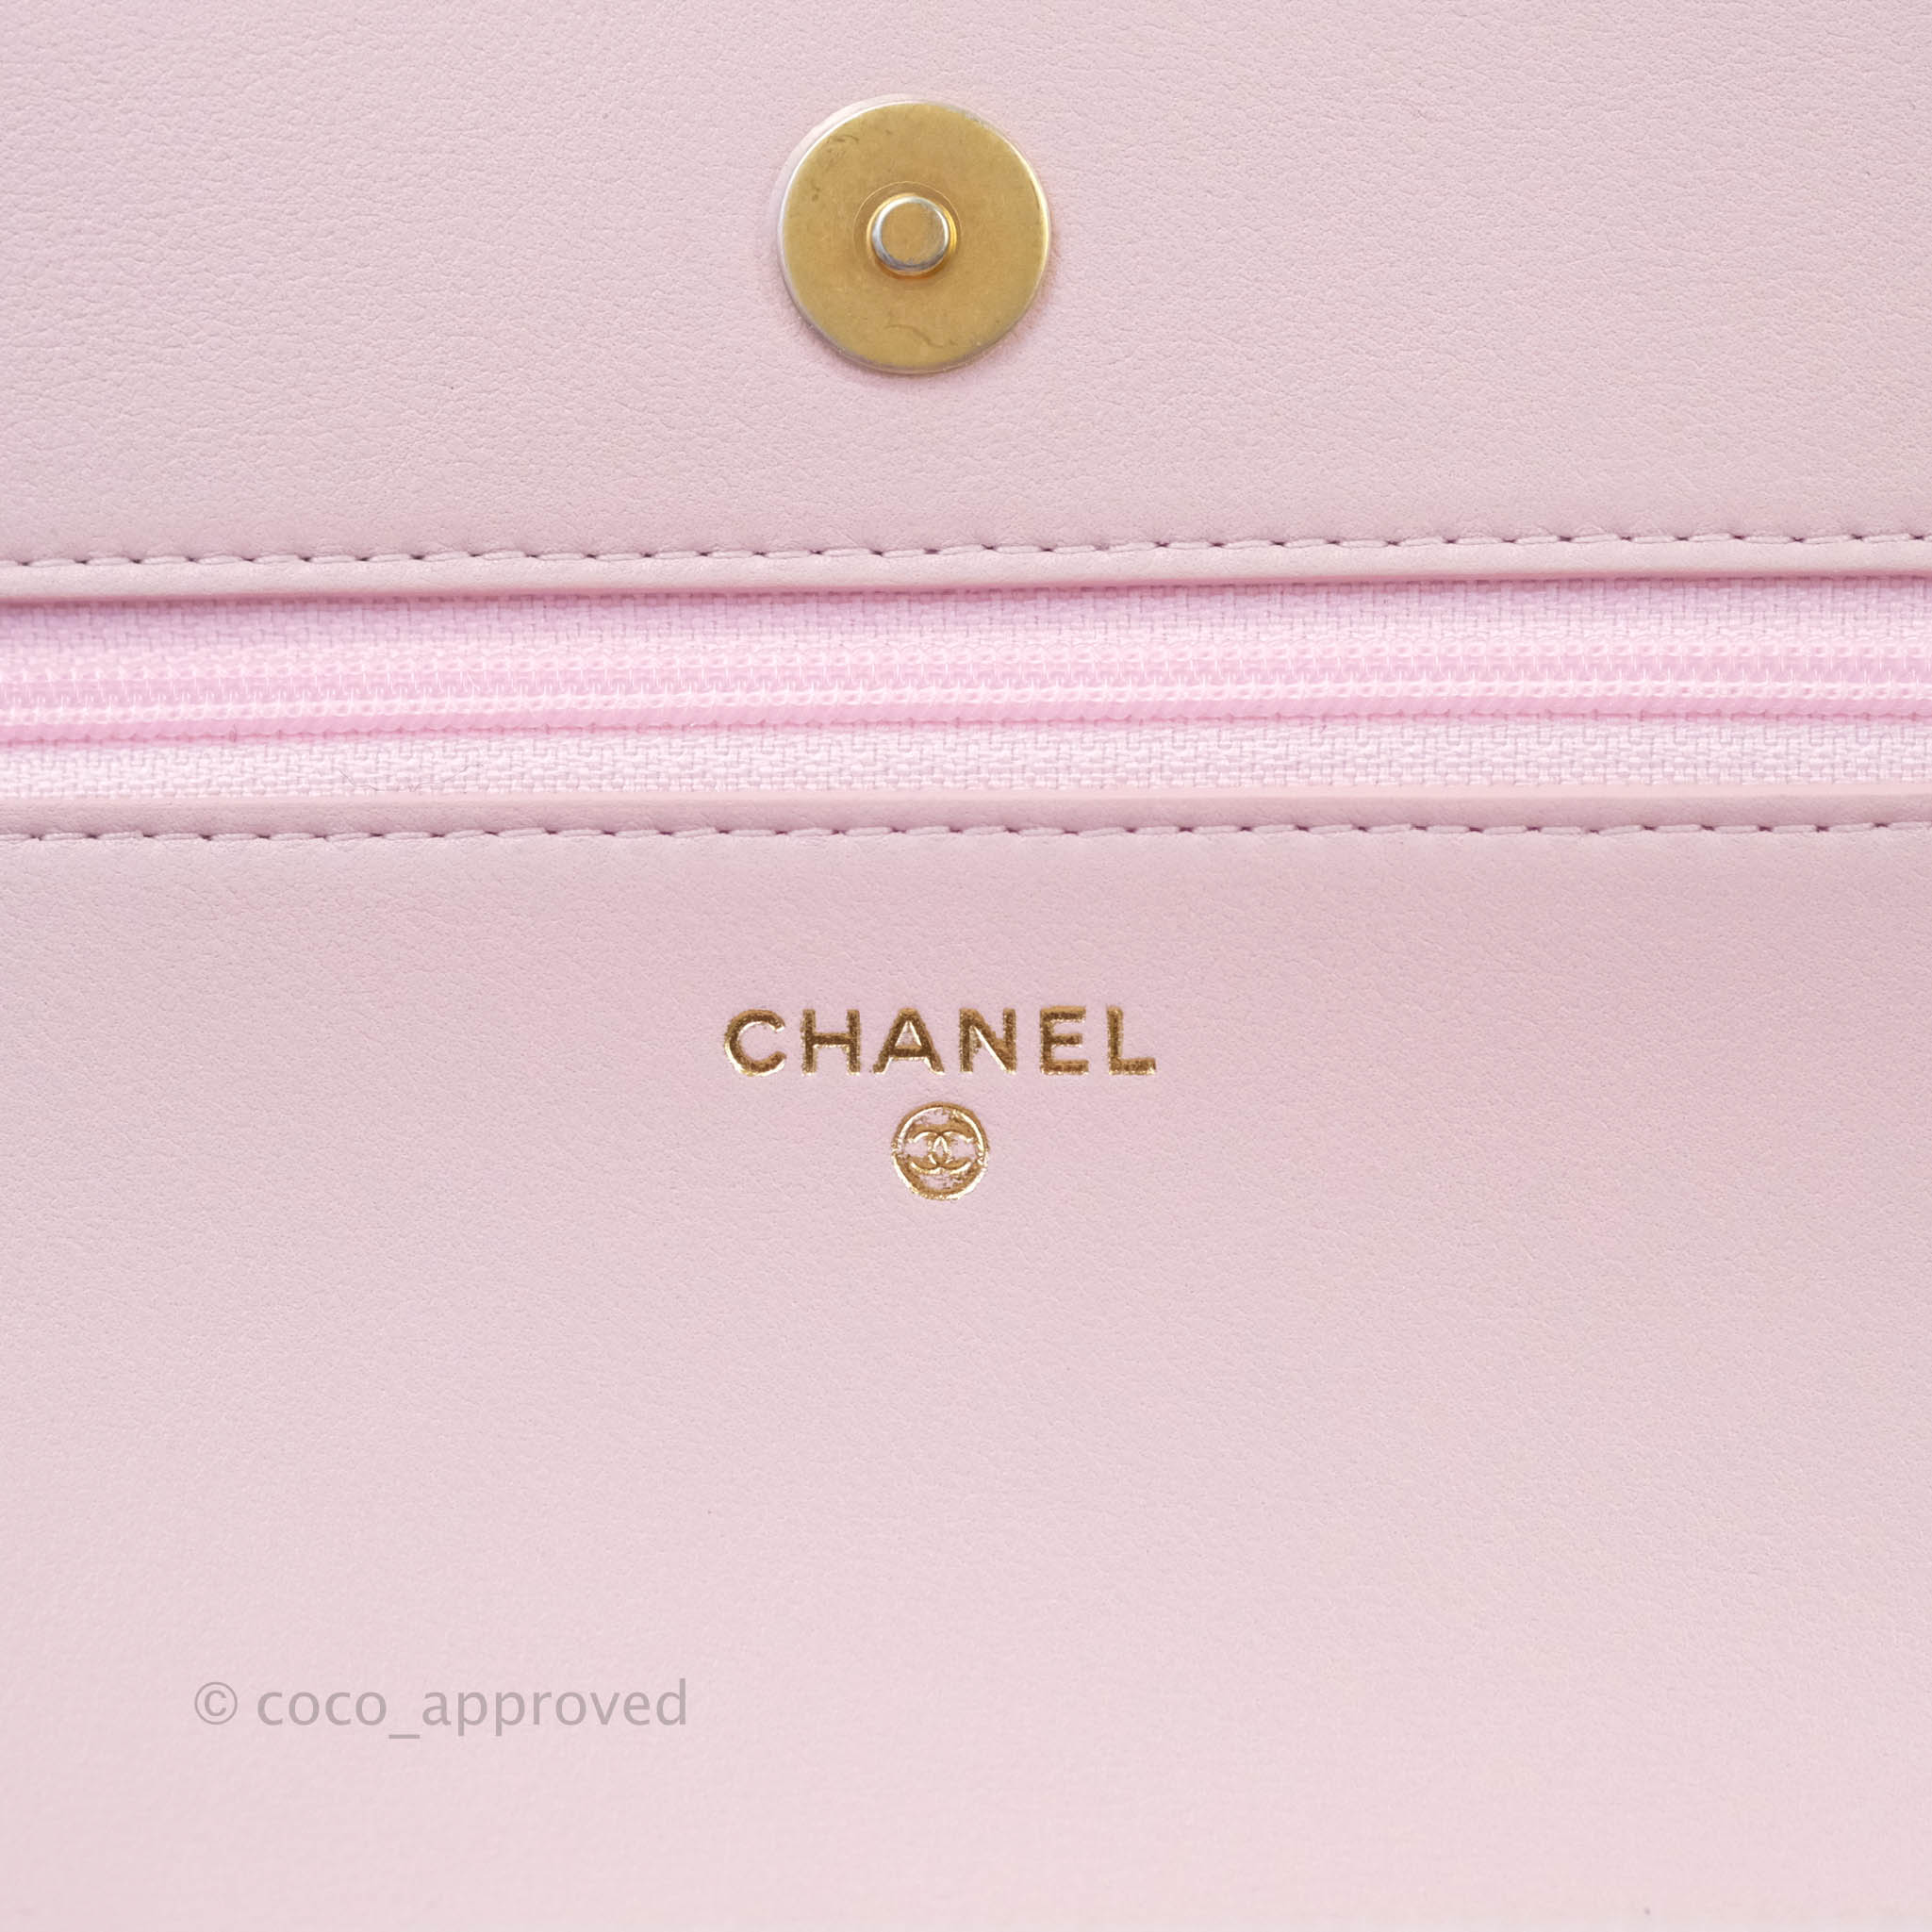 Chanel Rare Hot Pink Caviar Wallet on Chain (WOC) – Classic Coco Authentic  Vintage Luxury